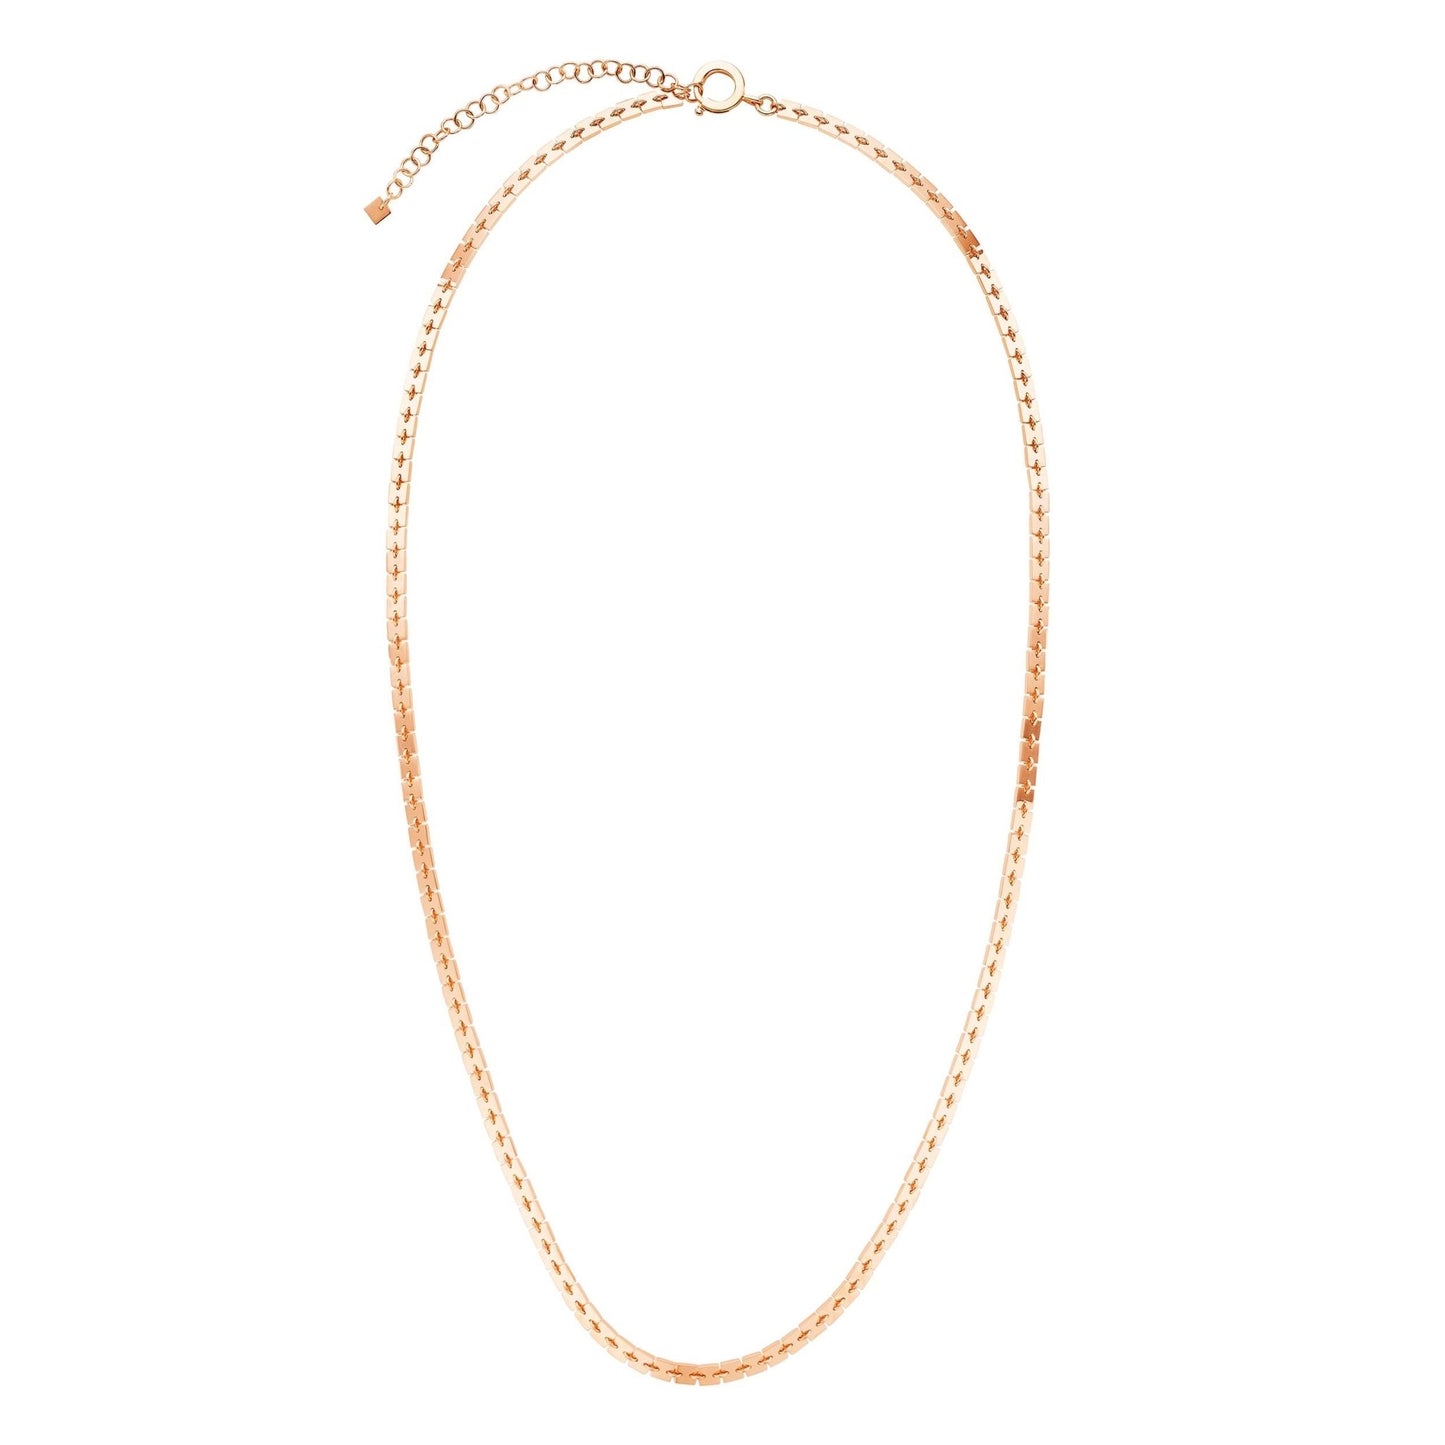 20in Rose Gold Foundation Chain Necklace - Cadar